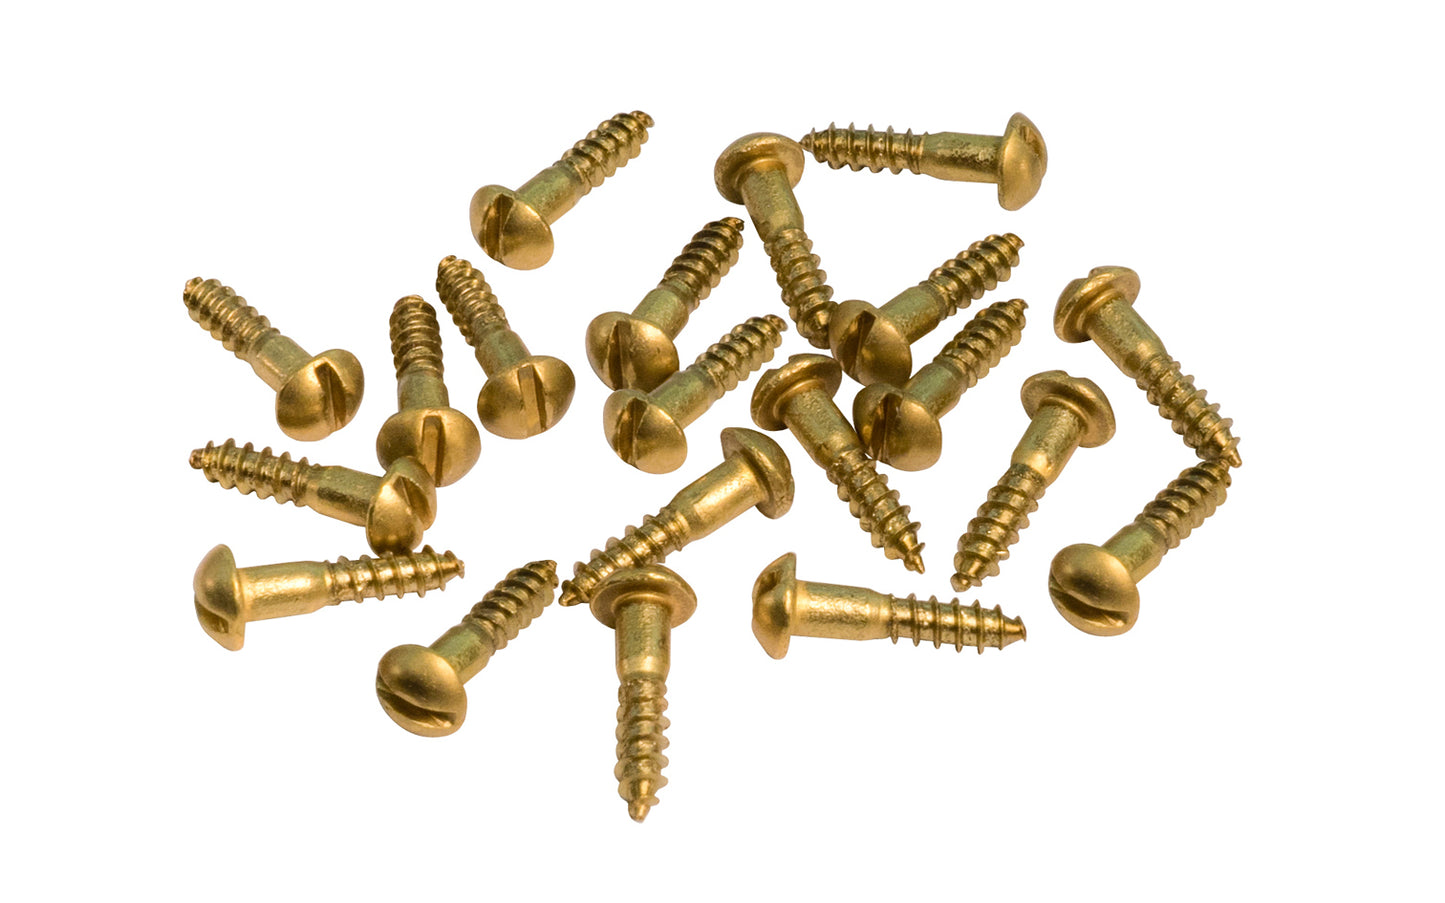 Solid Brass #5 x 5/8" Round Head Slotted Wood Screws. Traditional & classic vintage-style wood screws. Sold as 20 pieces in a bag. Available in Unlacquered brass Non-Lacquered Brass (will patina over time). Slotted Head